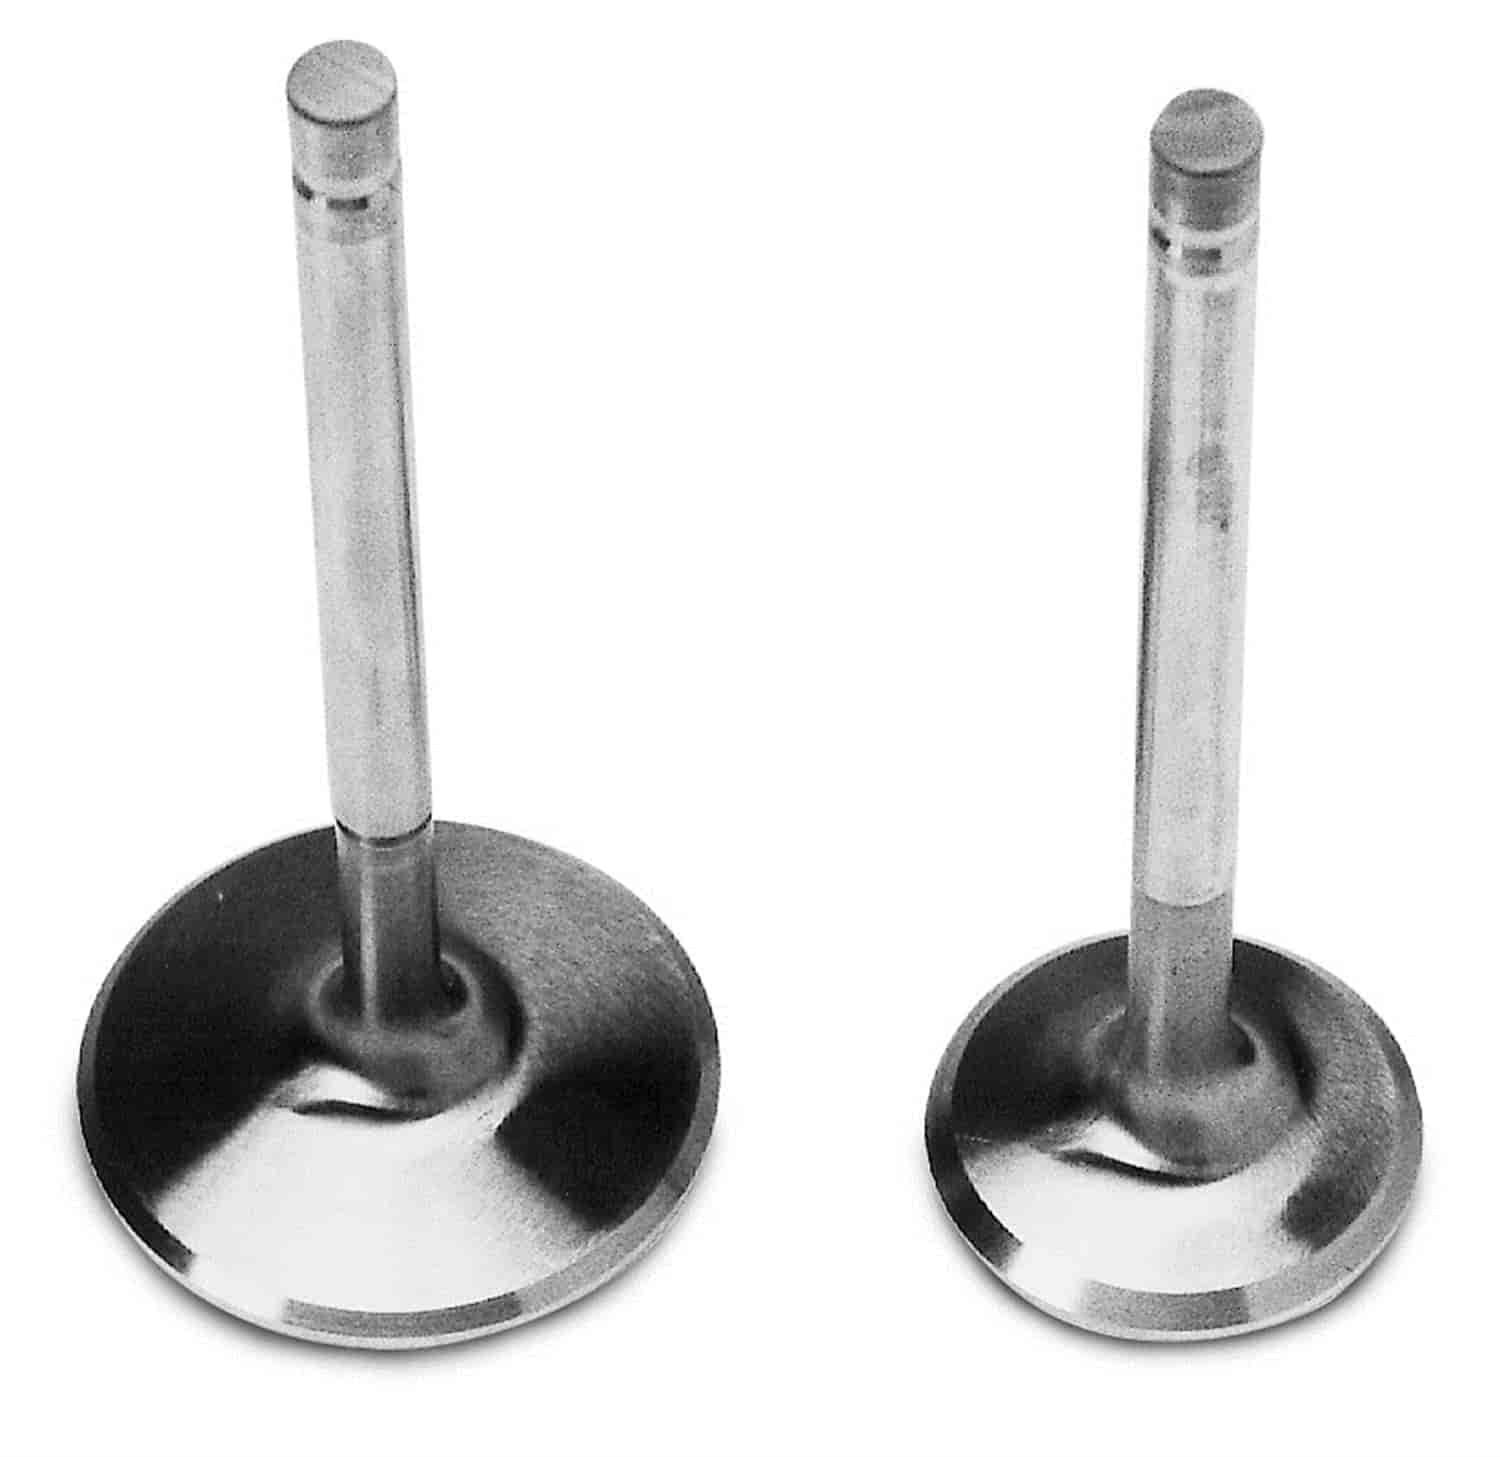 Exhaust Valve Set 1.60" for Small Block Ford #350-77169, 350-77179, 350-77189, 350-77199, & 350-77359